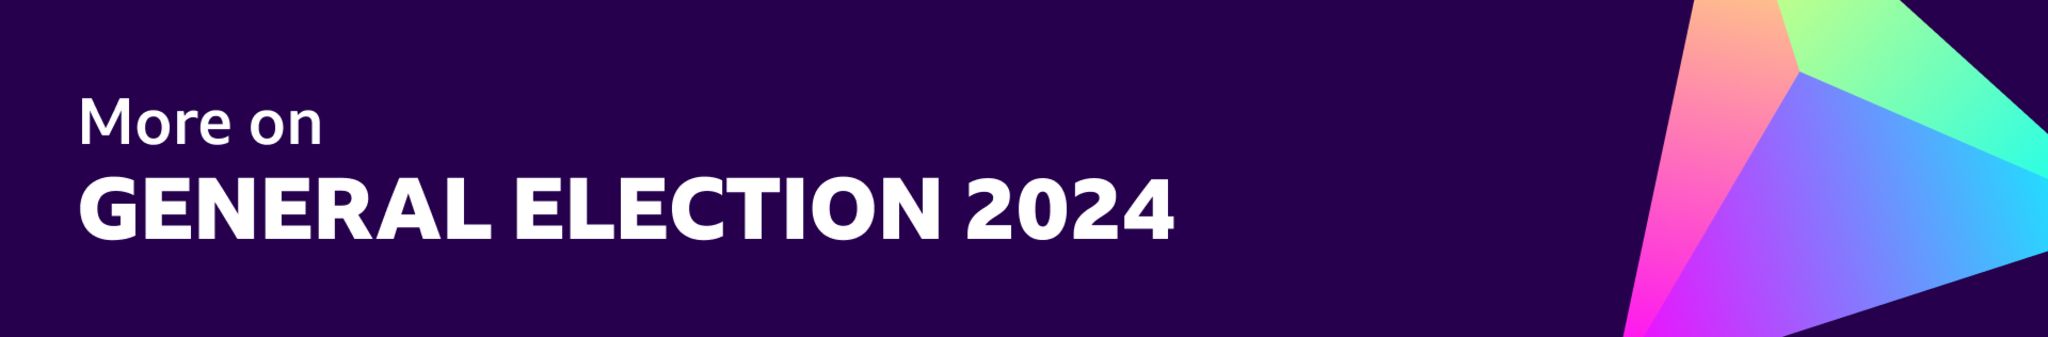 Banner image saying "More on GENERAL ELECTION 2024"